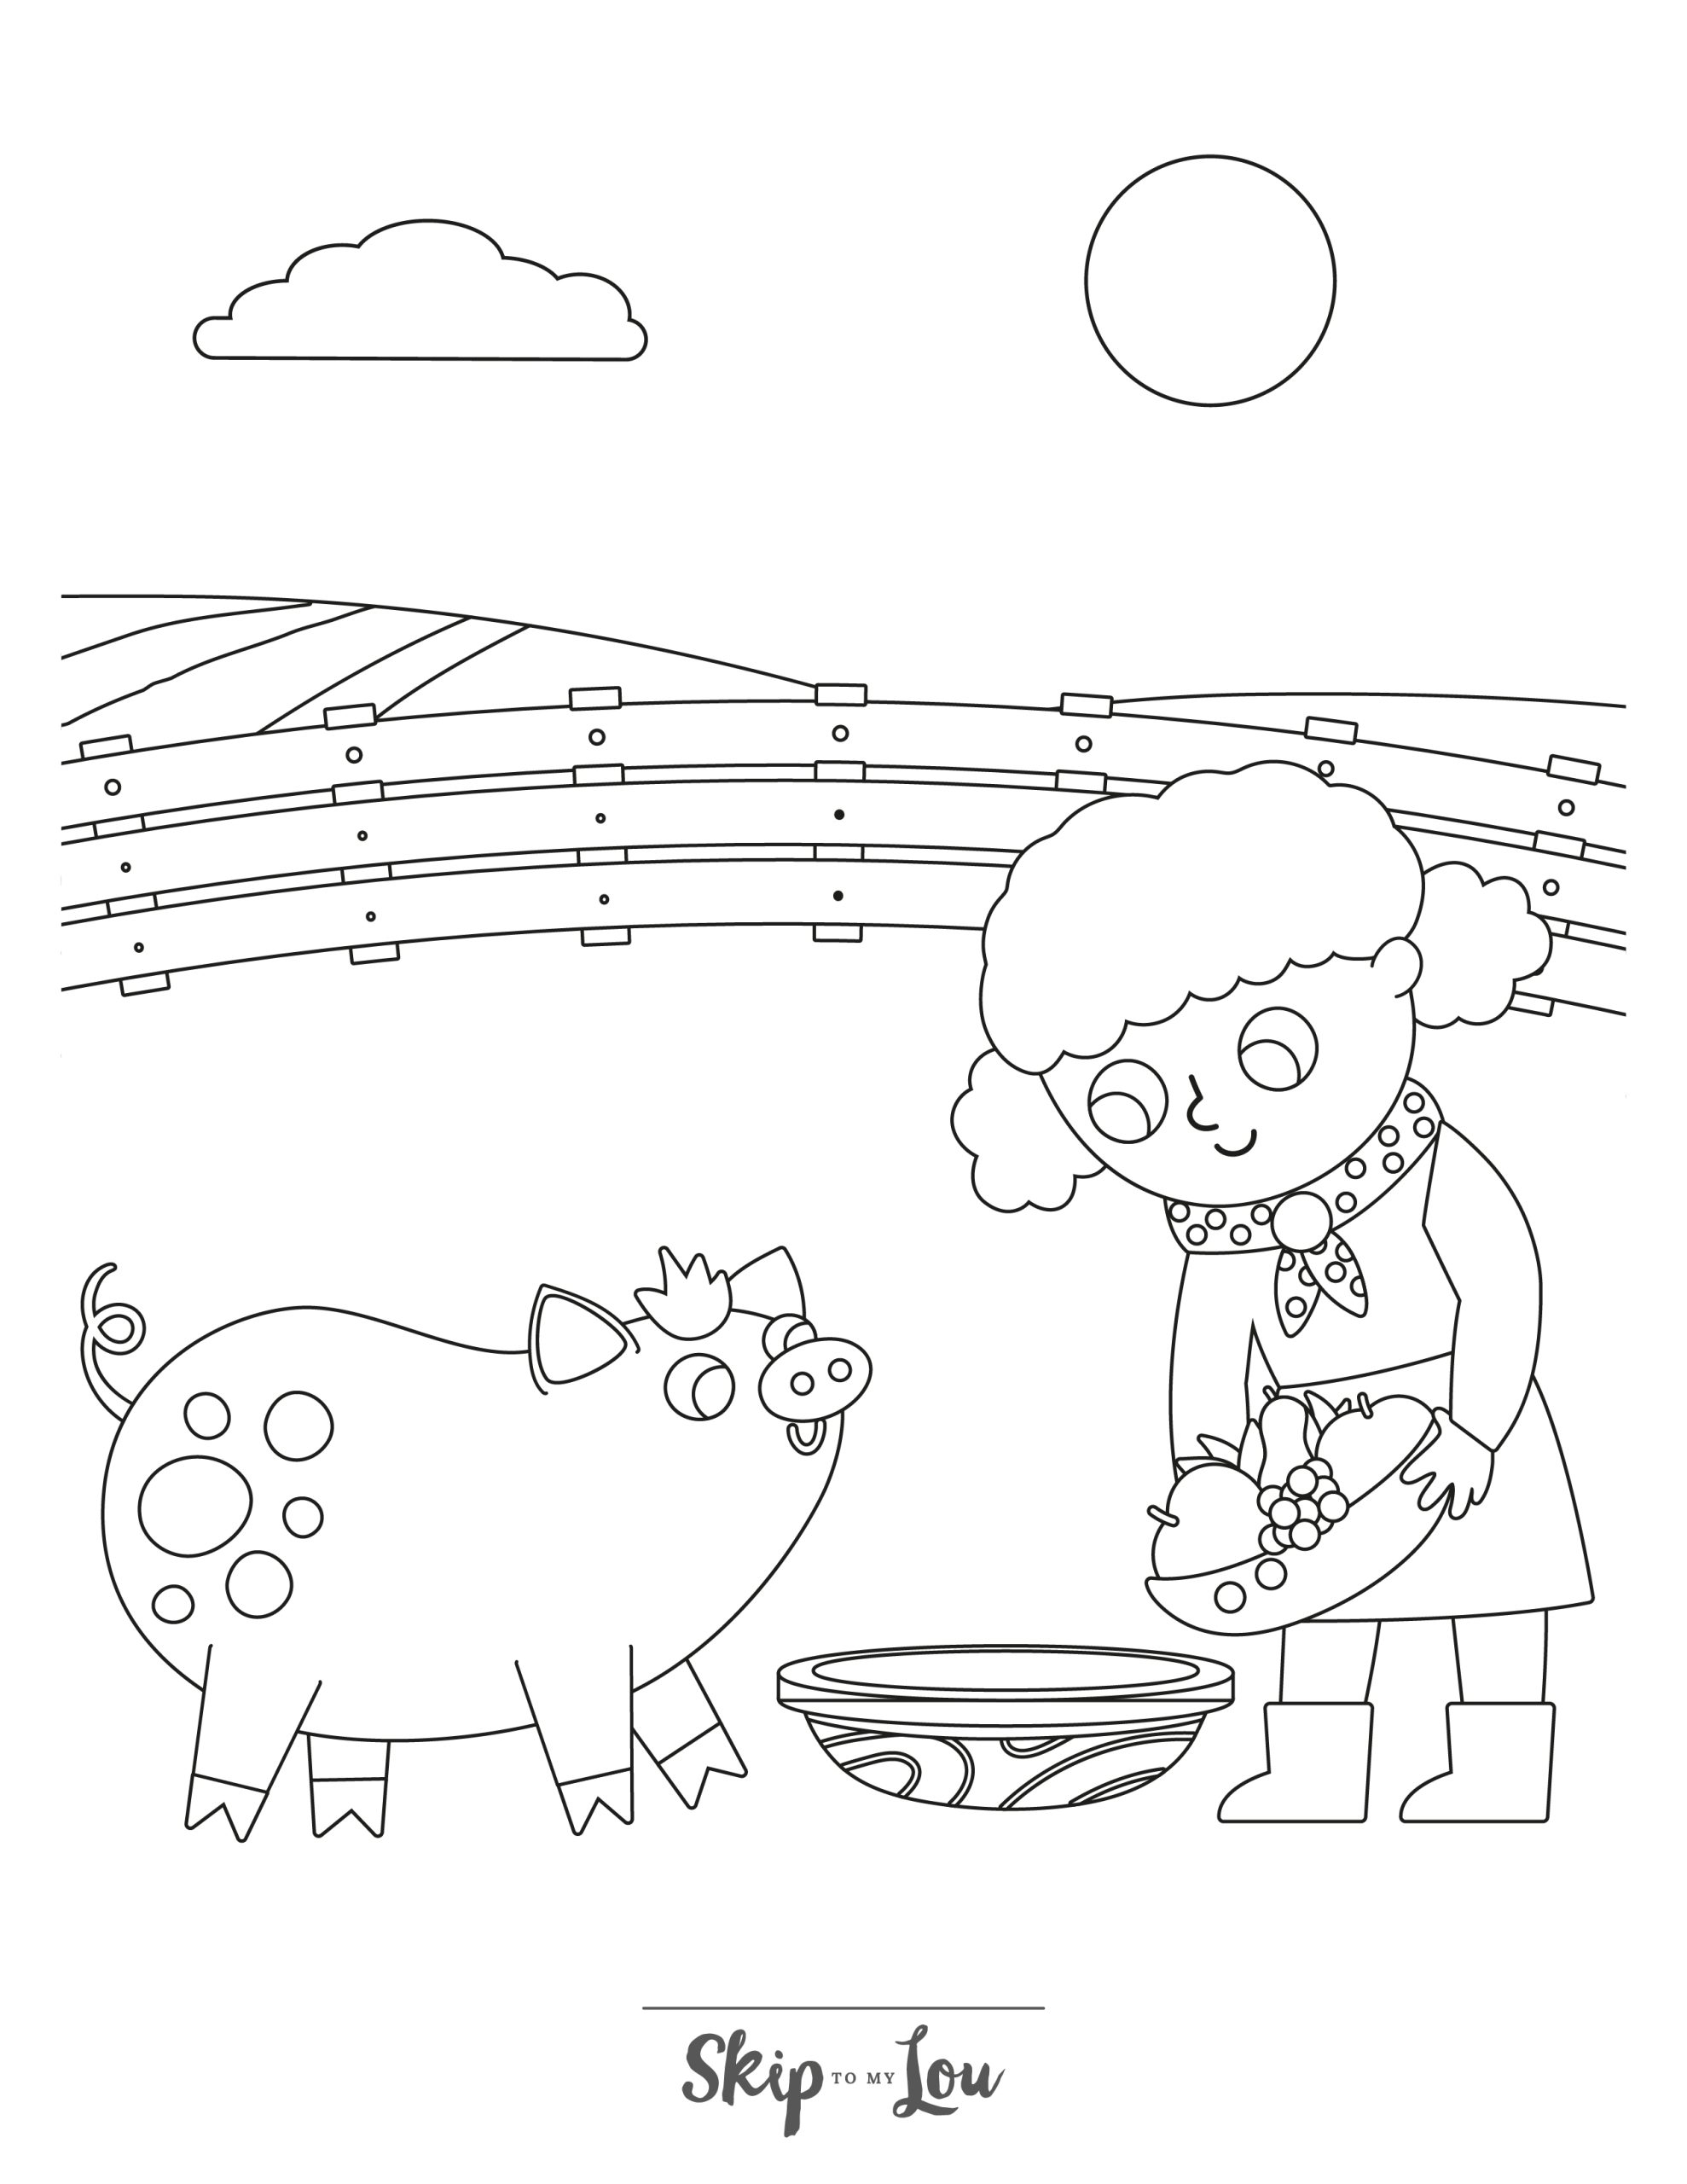 Farm Coloring Page 12 - A line drawing of a pig being fed by a woman. The woman is putting food into a bowl. A fence and field are in the background. 